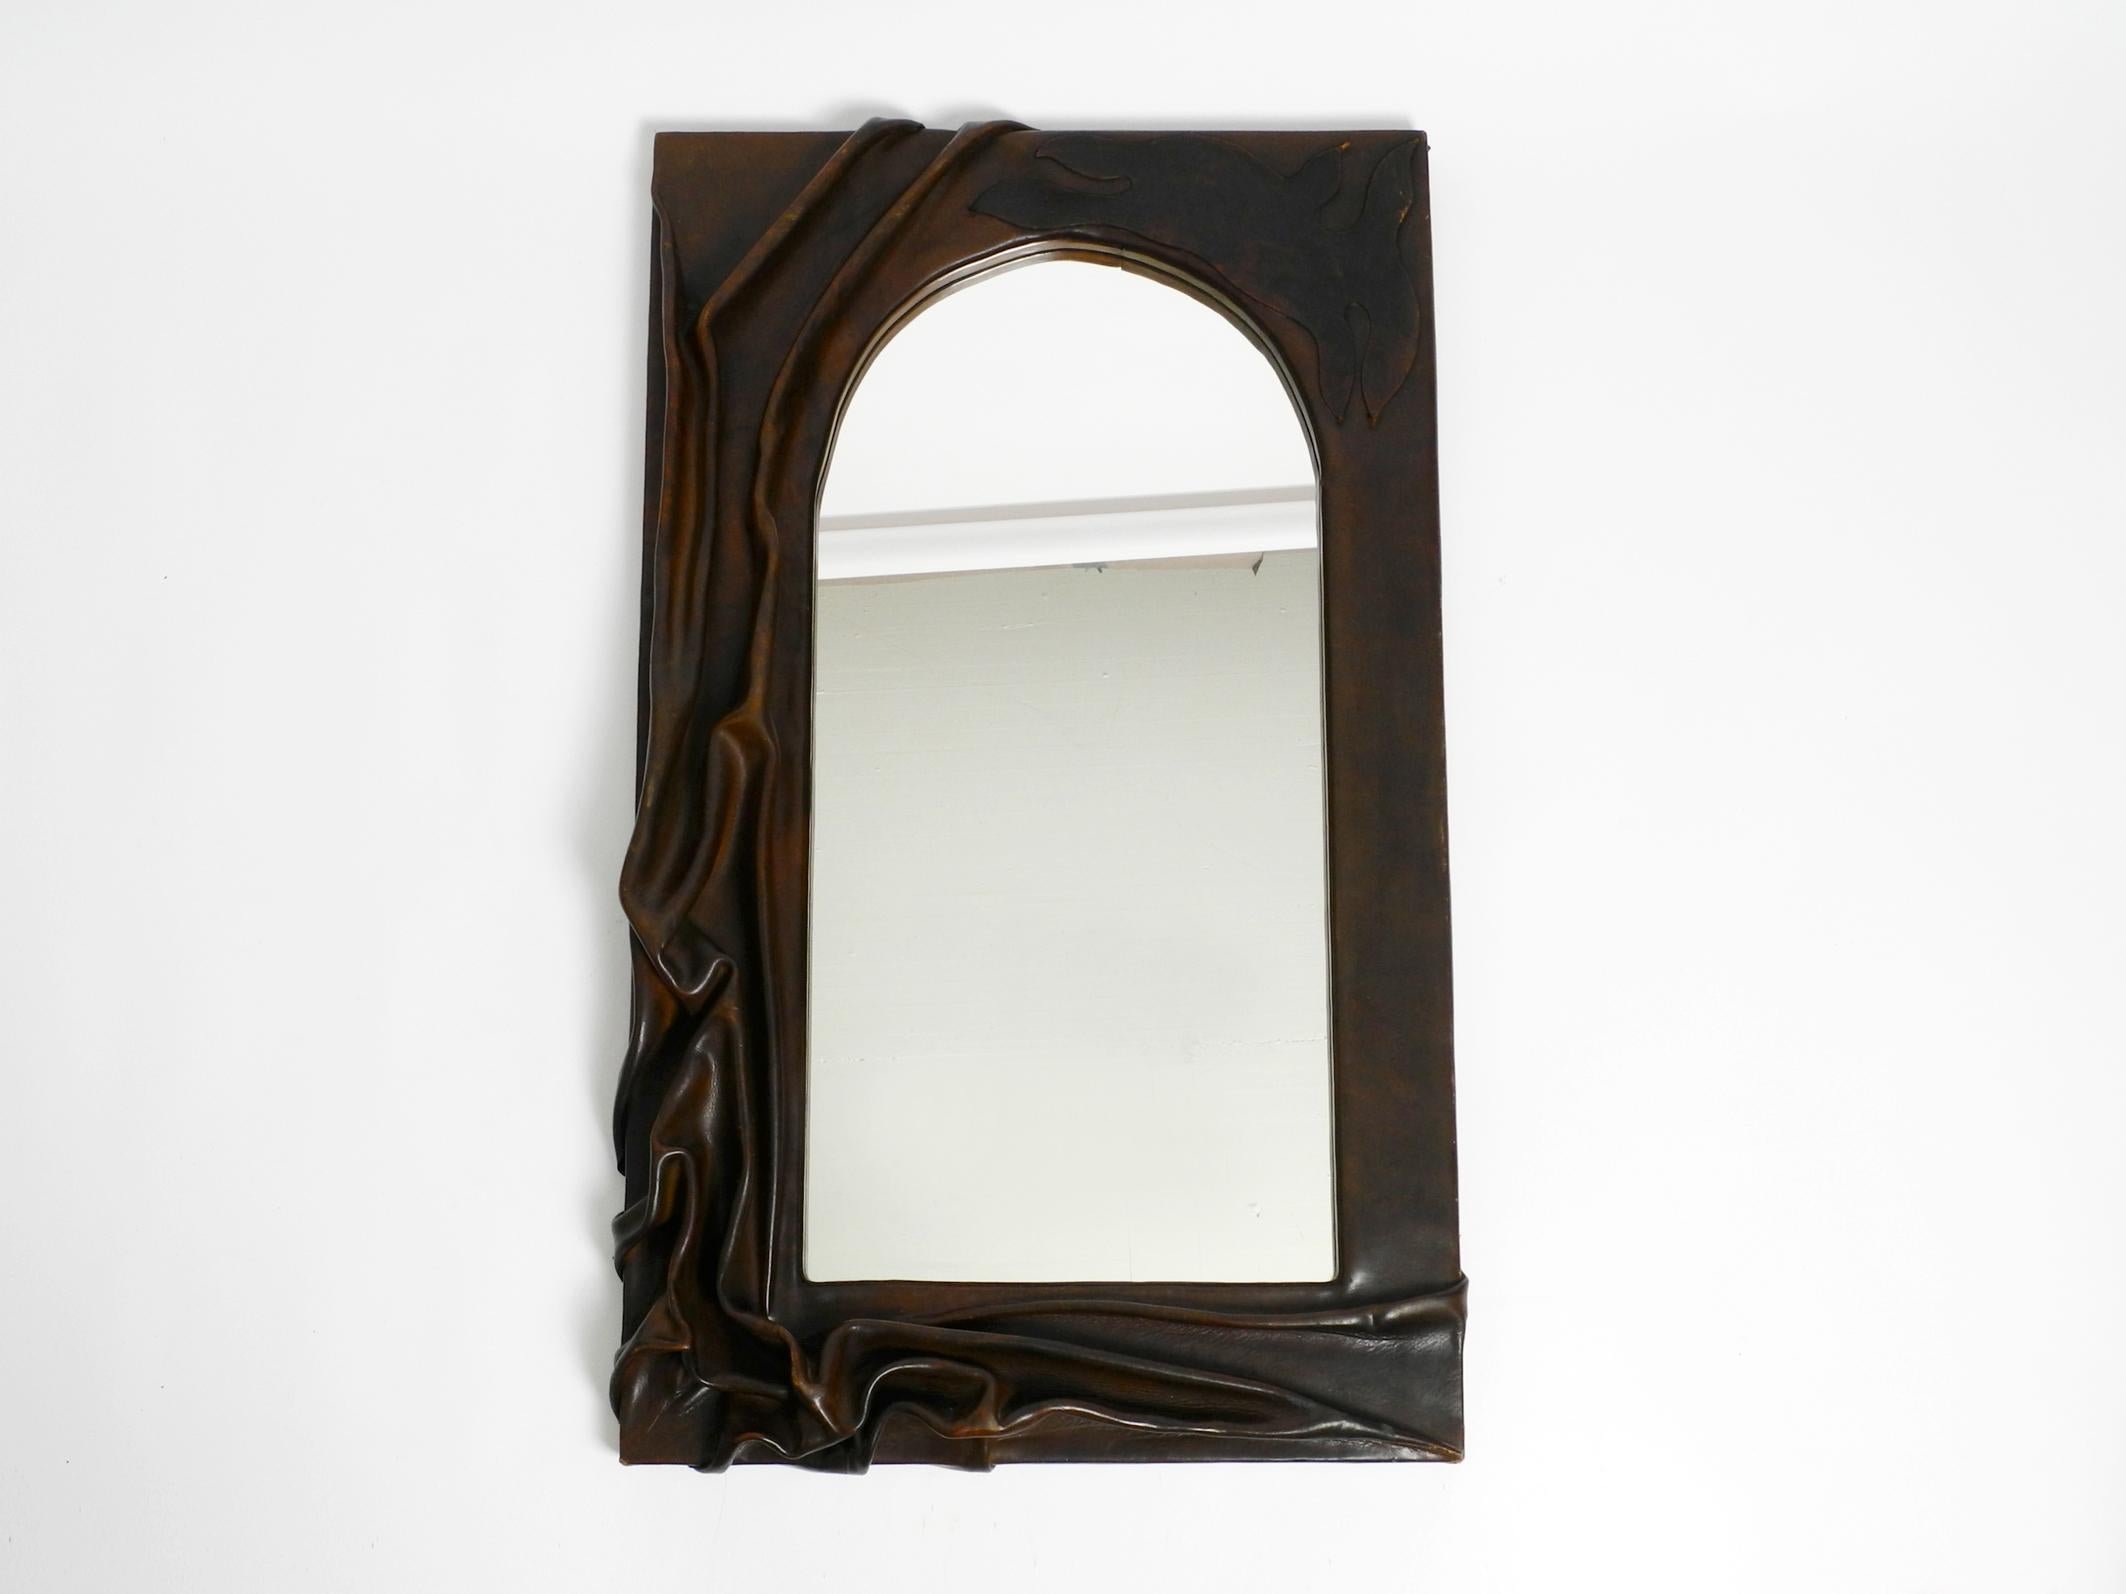 Beautiful rare large wooden wall mirror with artful thick leather cover. Handcrafted in the 1970s. Each of those mirrors is unique.
Very elegant sculptural design made of thick, solid cowhide. Mirror glass is without damages. Not blind.
The leather